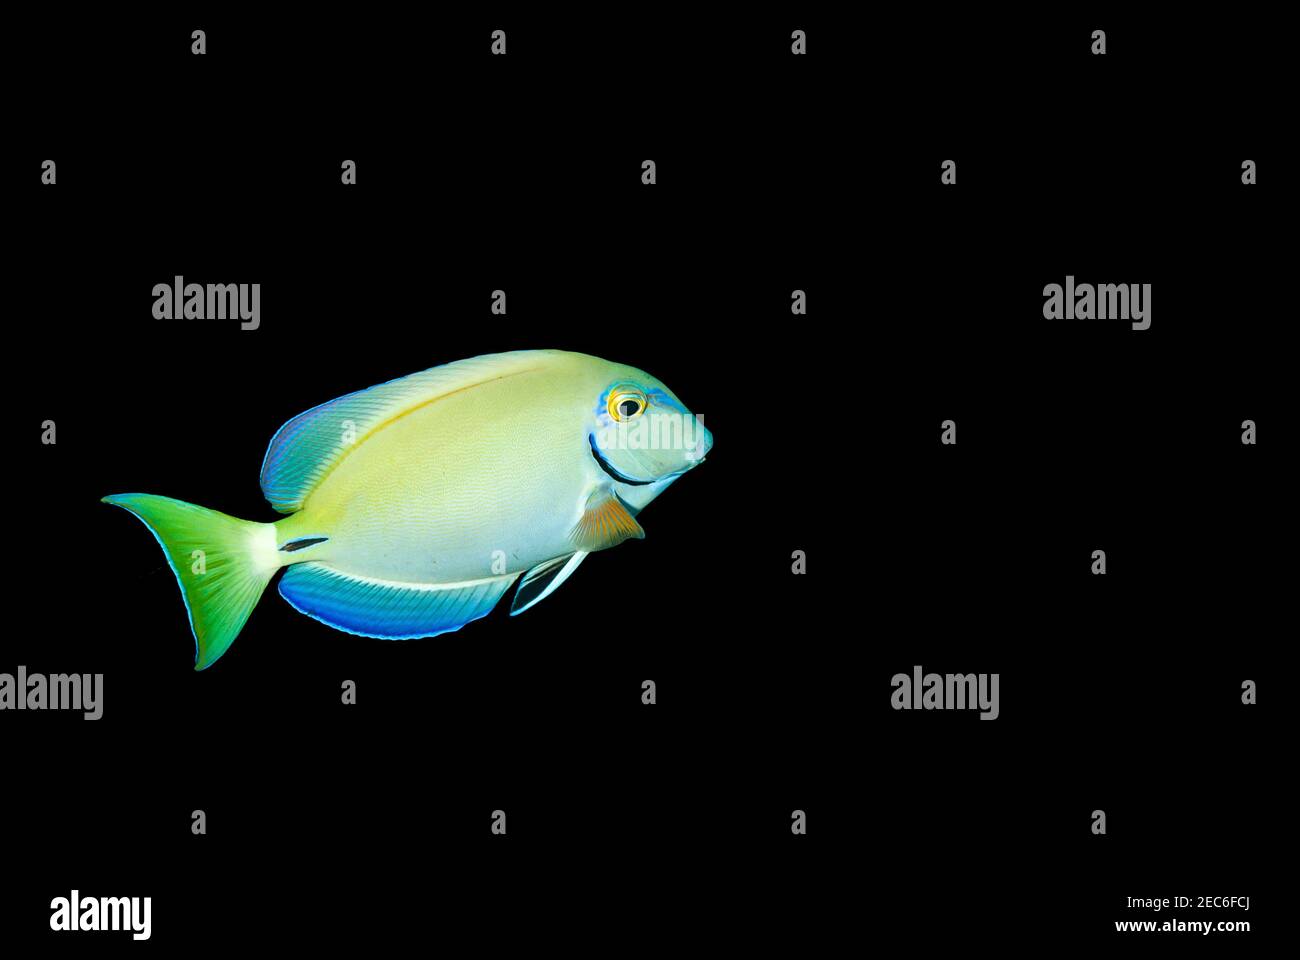 Yellow and blue Ocean Surgeonfish swimming against a black background Stock Photo